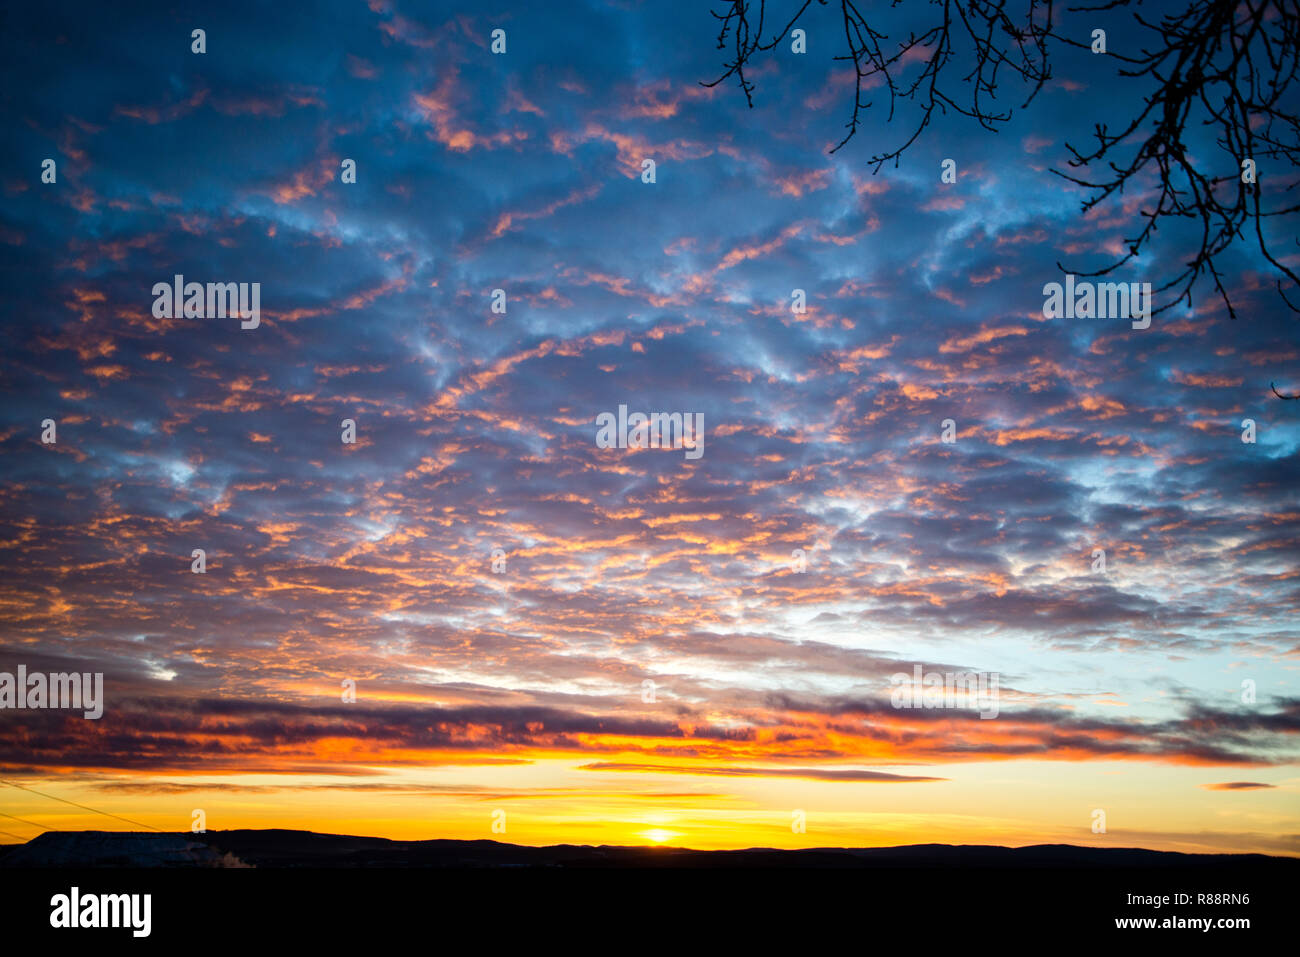 tragic sky, yellow-pink clouds, sunrise, bright colorstree branches Stock Photo